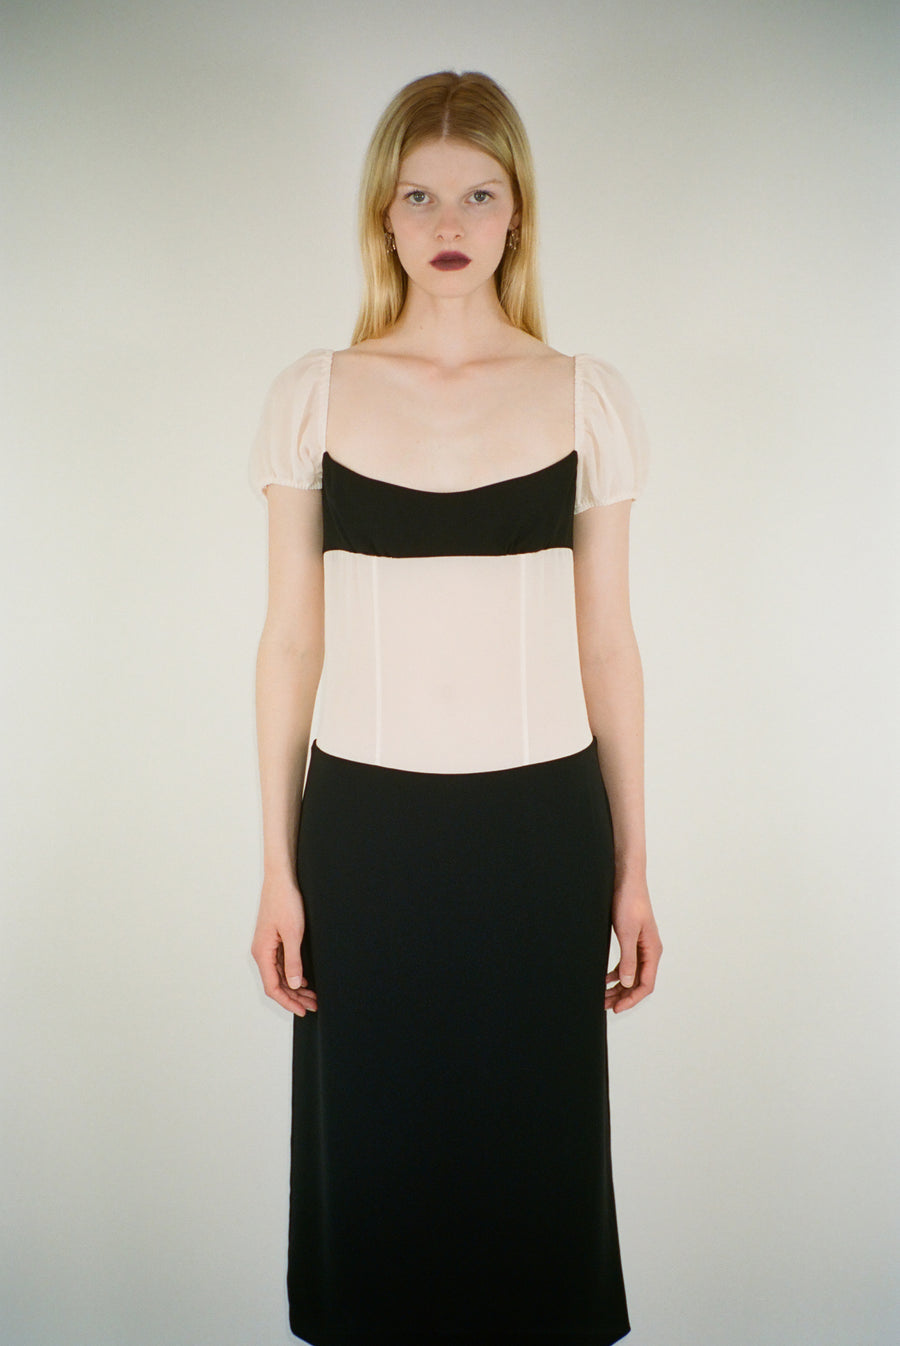 Midi length dress in off white and black with sheer bodice on model